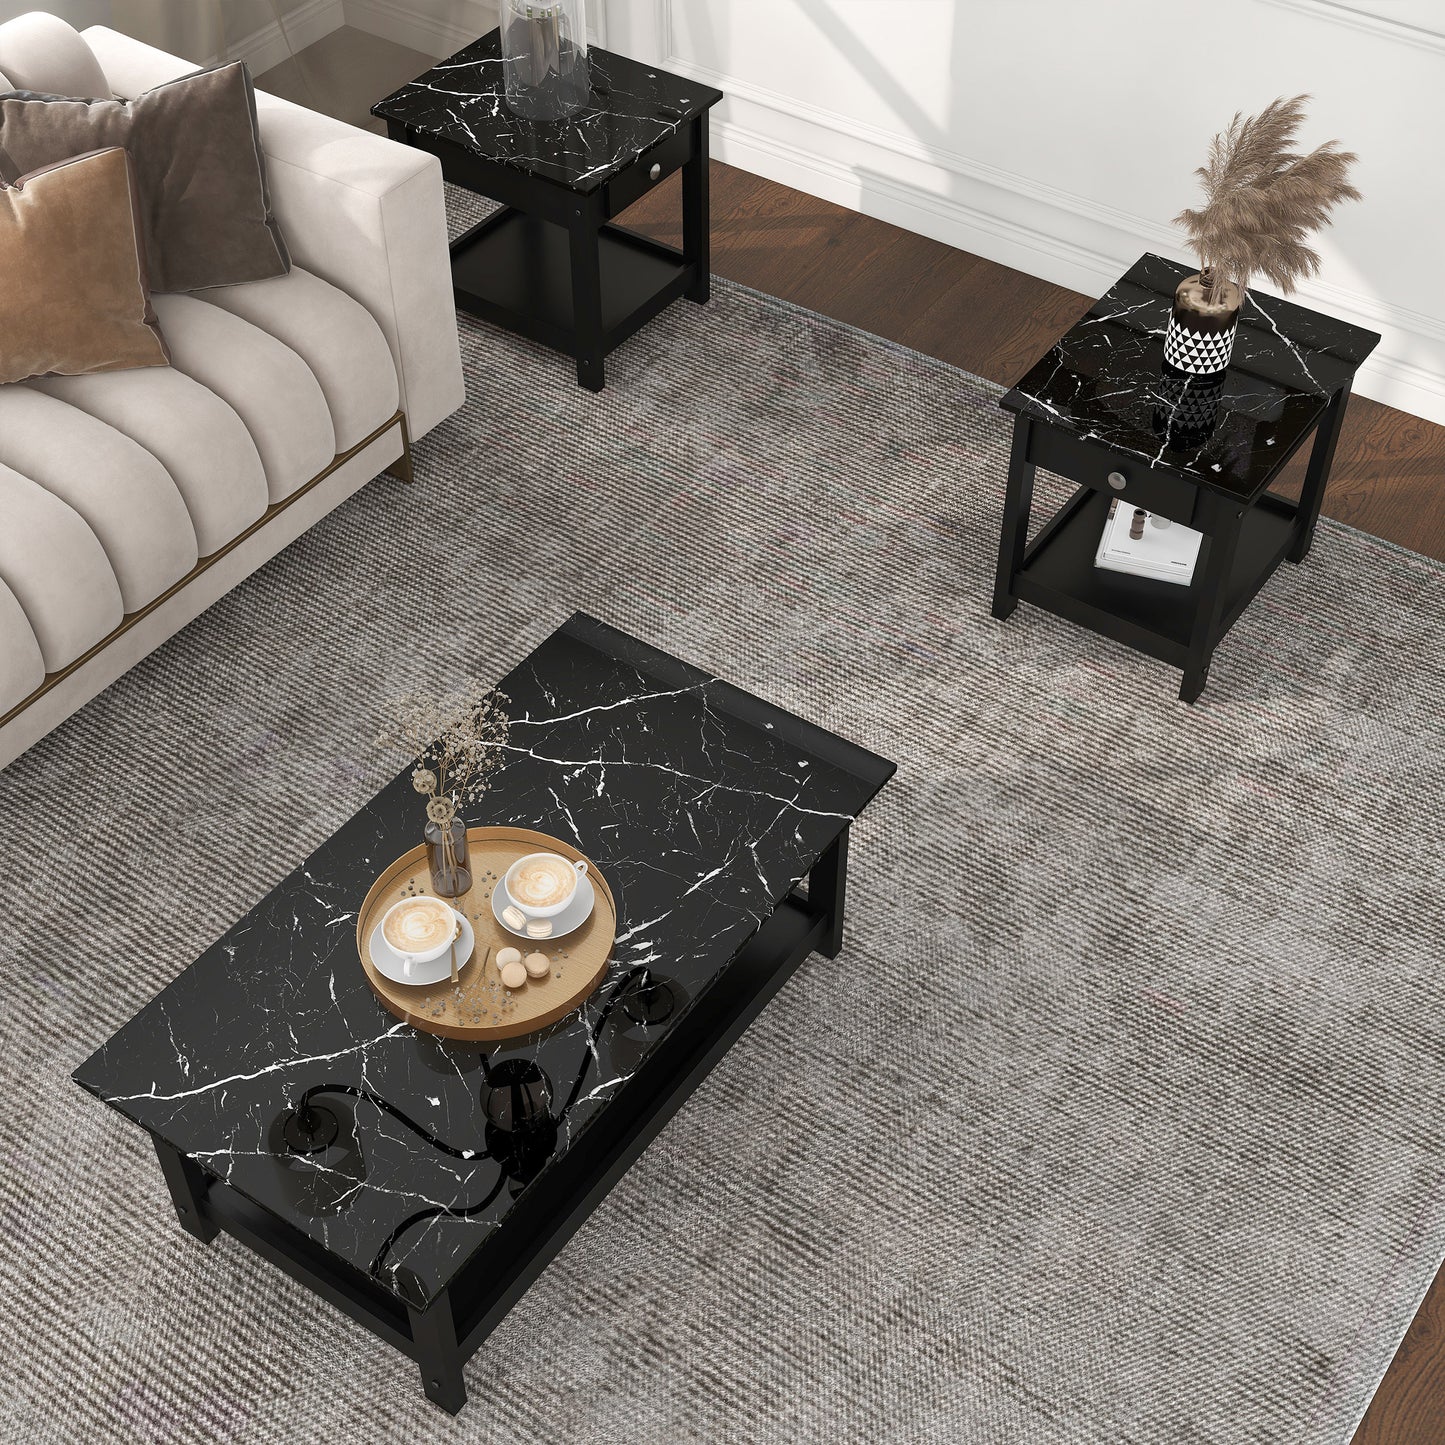 Right angled bird's eye view of a three-piece modern black and faux marble coffee table set with lower shelves in a living area with accessories